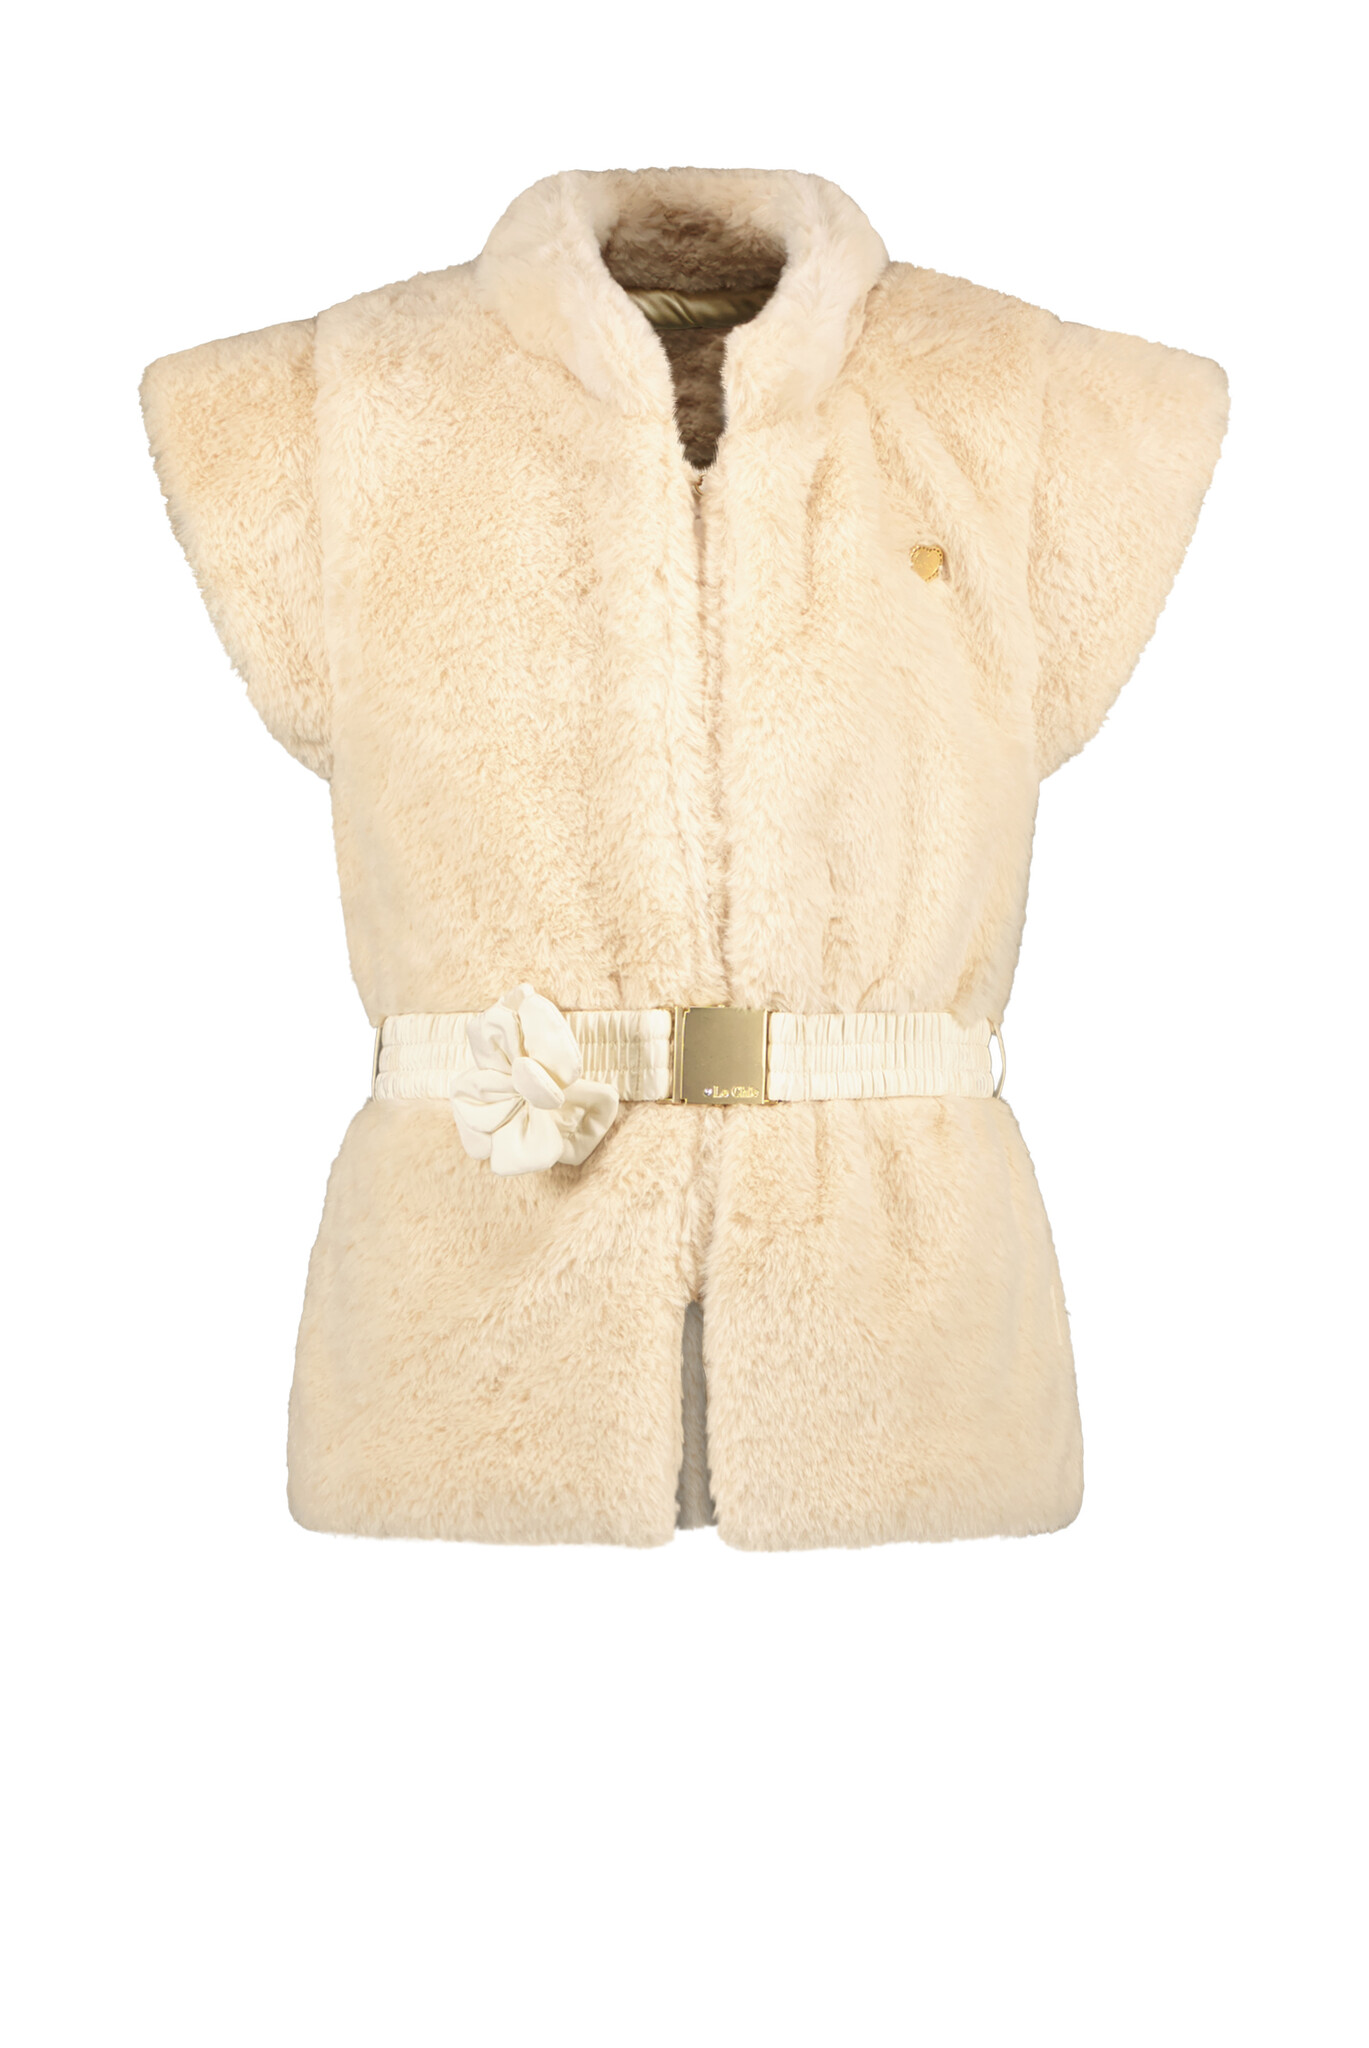 Le Chic C308-5105 Meisjes Gilet - Pearled Ivory - Maat 116